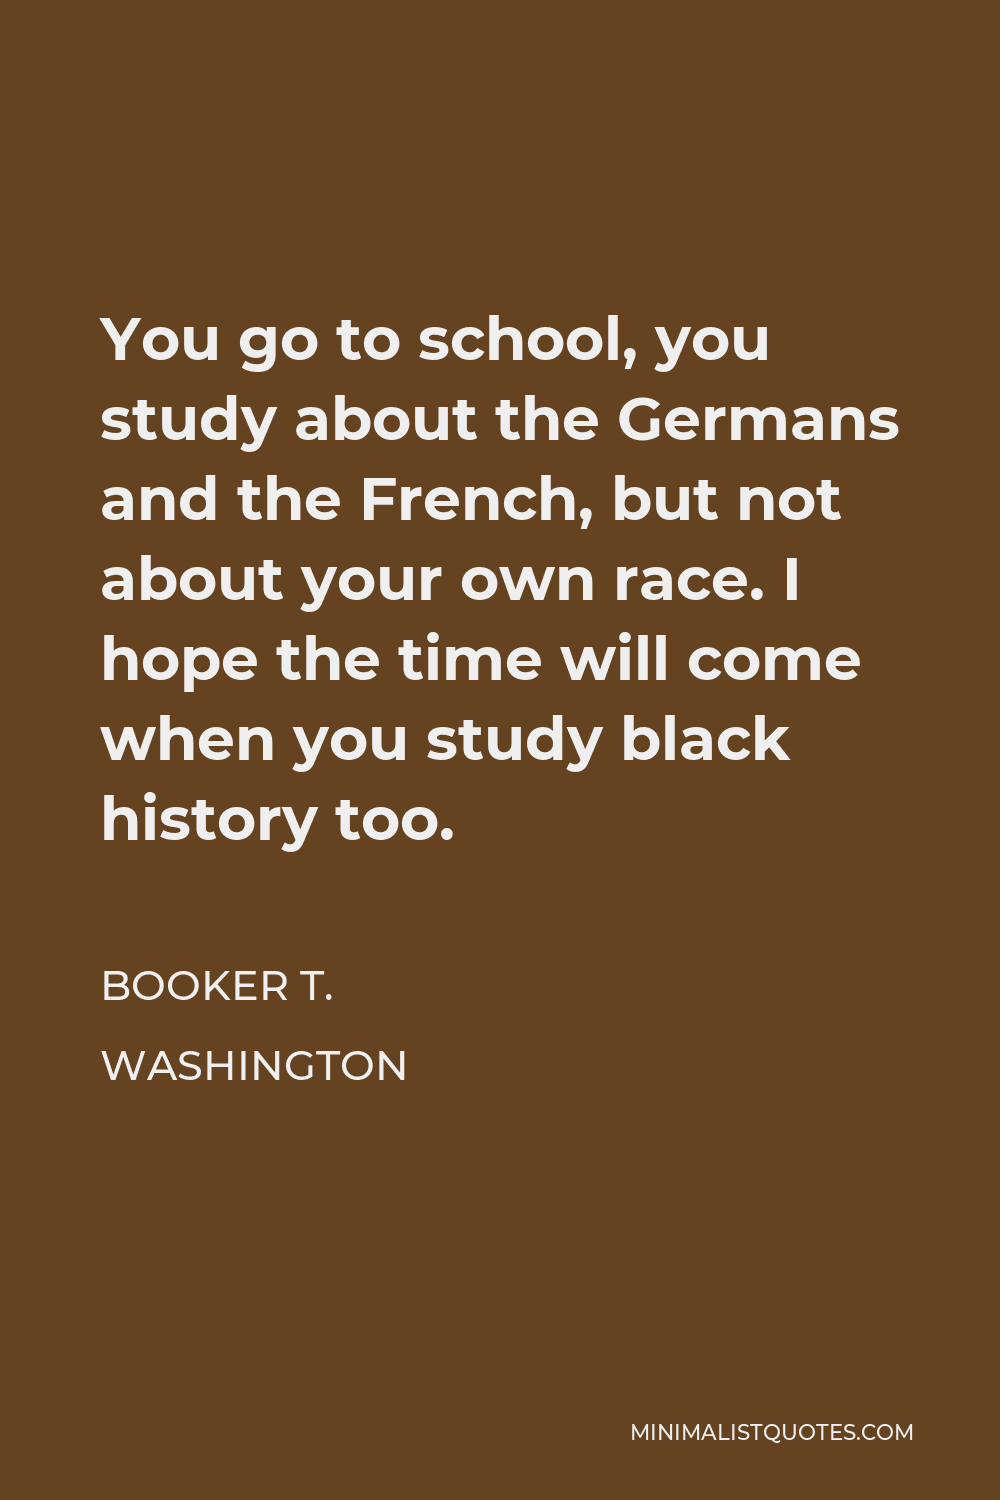 Booker T. Washington Quote - You go to school, you study about the Germans and the French, but not about your own race. I hope the time will come when you study black history too.